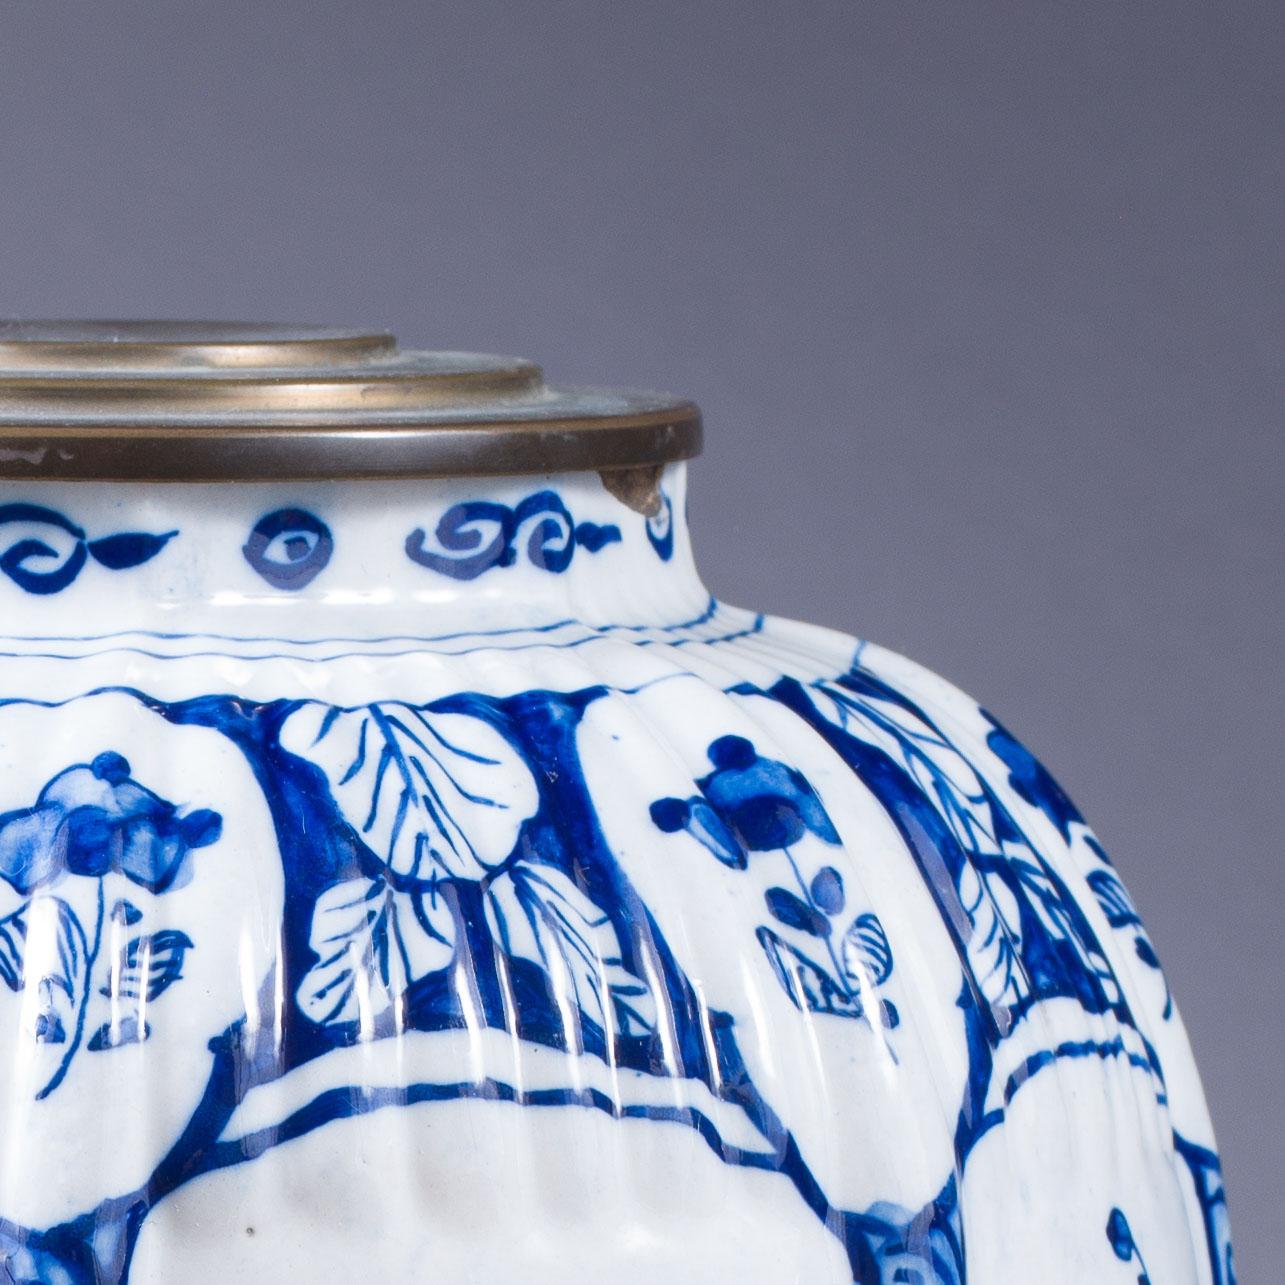 Charming early 19th century Delft cobalt blue and white vase decorated with four repeated hand-painted scenes of parrots perched above whimsical buildings and bridges over waterways with figures walking.
The Netherlands, circa 1820

Measures: